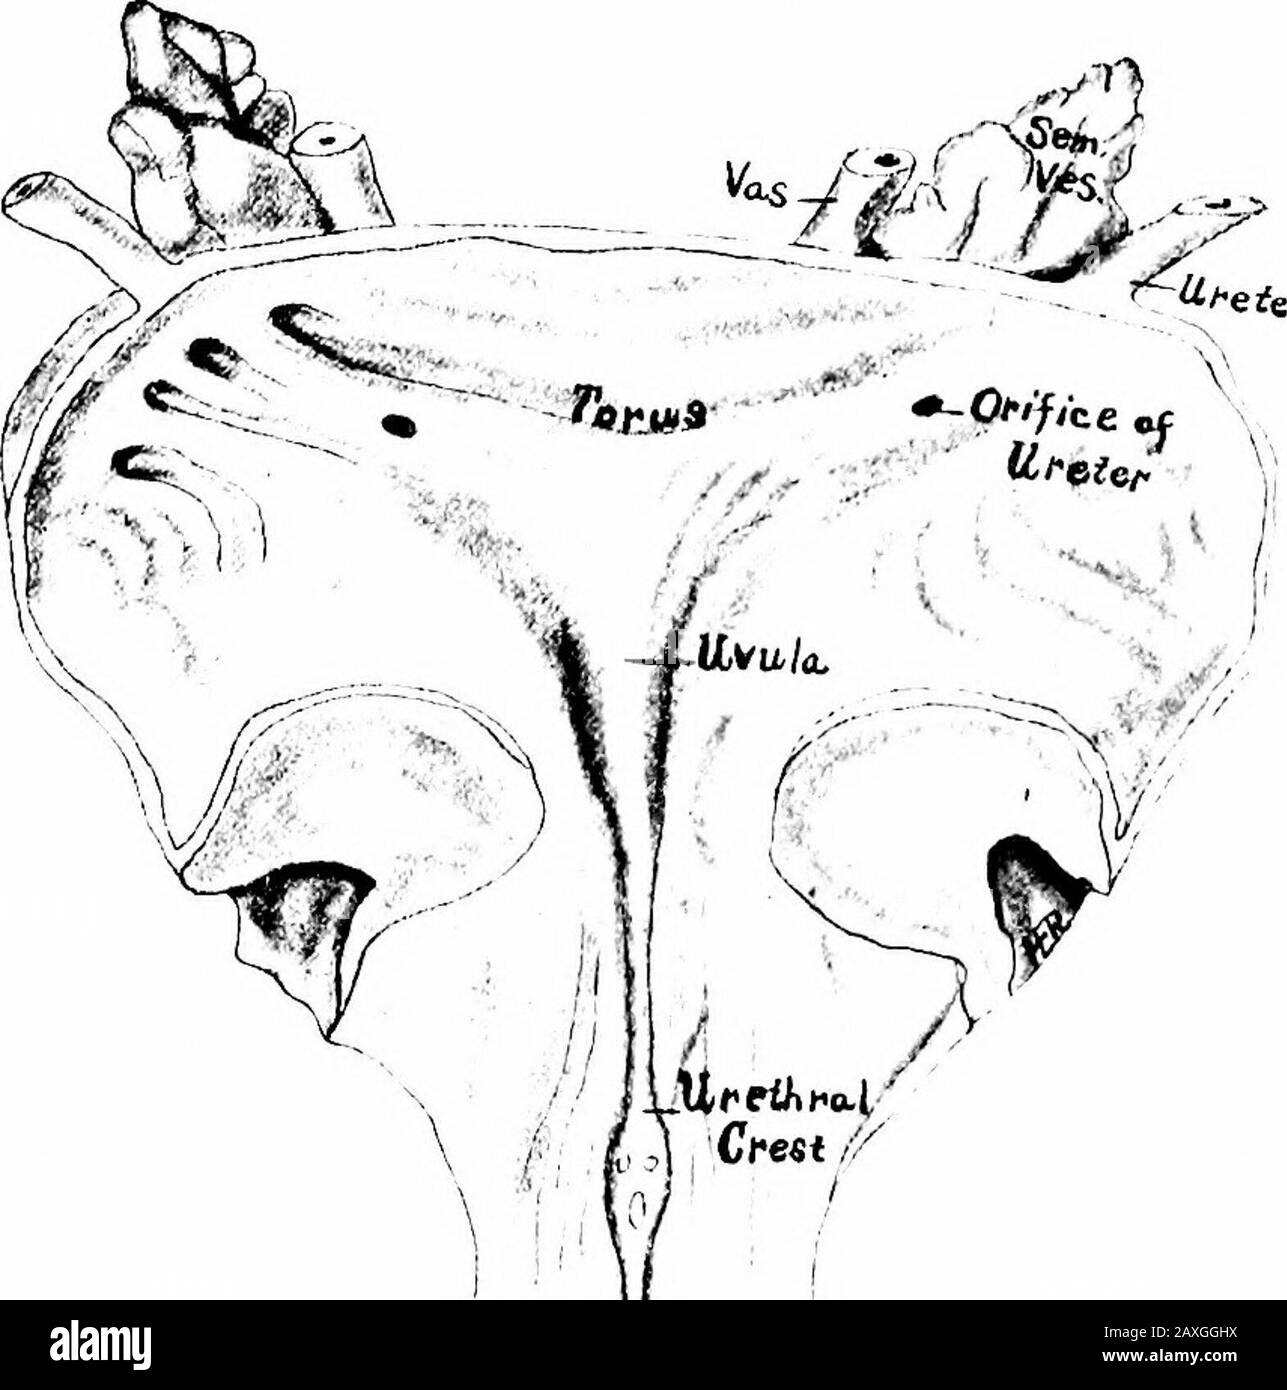 A manual of anatomy . cm.)in width and nearly 4 inches (10 cm.) dorsoventrally, and thenextends into the abdominal cavity. In the female the width isgreater and the dorsoventral dimension less. Its capacity is about ipint (500 to 700 c.c.) but is usually emptied when it contains 8 to 10ounces (about 300 c.c). THE BLADDER 321 The bladder presents an apex, a base, a superior and ventroinjeriorand two lateral surfaces and illy defined borders. The apex {vertex vesica) is best seen in the nearly empty bladderand lies just behind the symphysis pubis. From this the urachusextends to the umbilicus. T Stock Photo